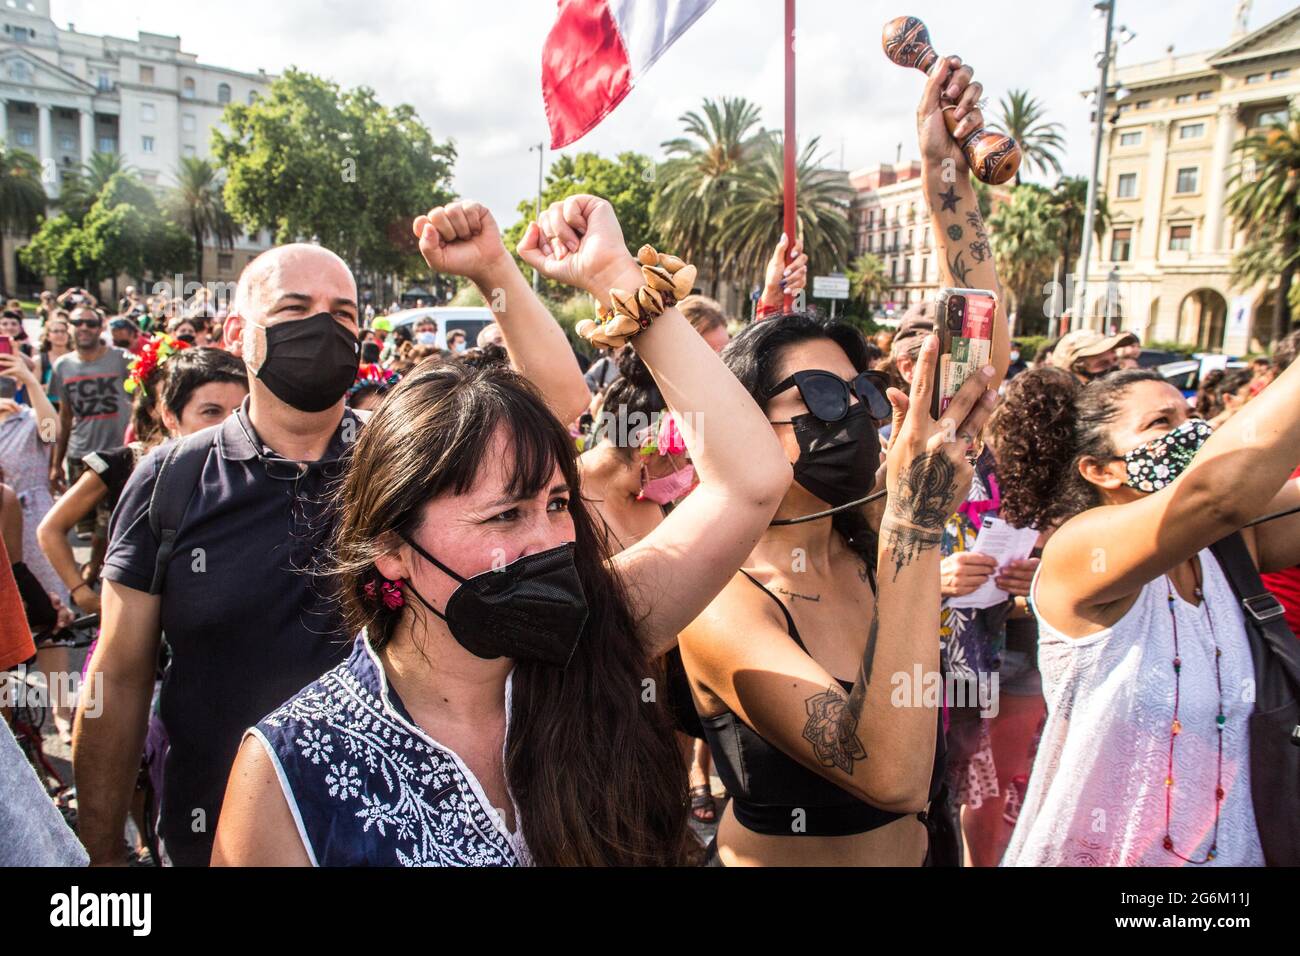 Barcelona, Catalonia, Spain. 6th July, 2021. People are seen with the fist up.Barcelona greets the 421 Squadron of the Zapatista Army of National Liberation (EZLN), a libertarian socialist political and militant group of Mexico, on their way through Europe. Composed of members known as Marijose, Lupita, Carolina, Ximena, Yuli, Bernal and Felipe, the 421 Squad has been received at the Columbus Monument by local collectives and social organizations. Credit: Thiago Prudencio/DAX/ZUMA Wire/Alamy Live News Stock Photo